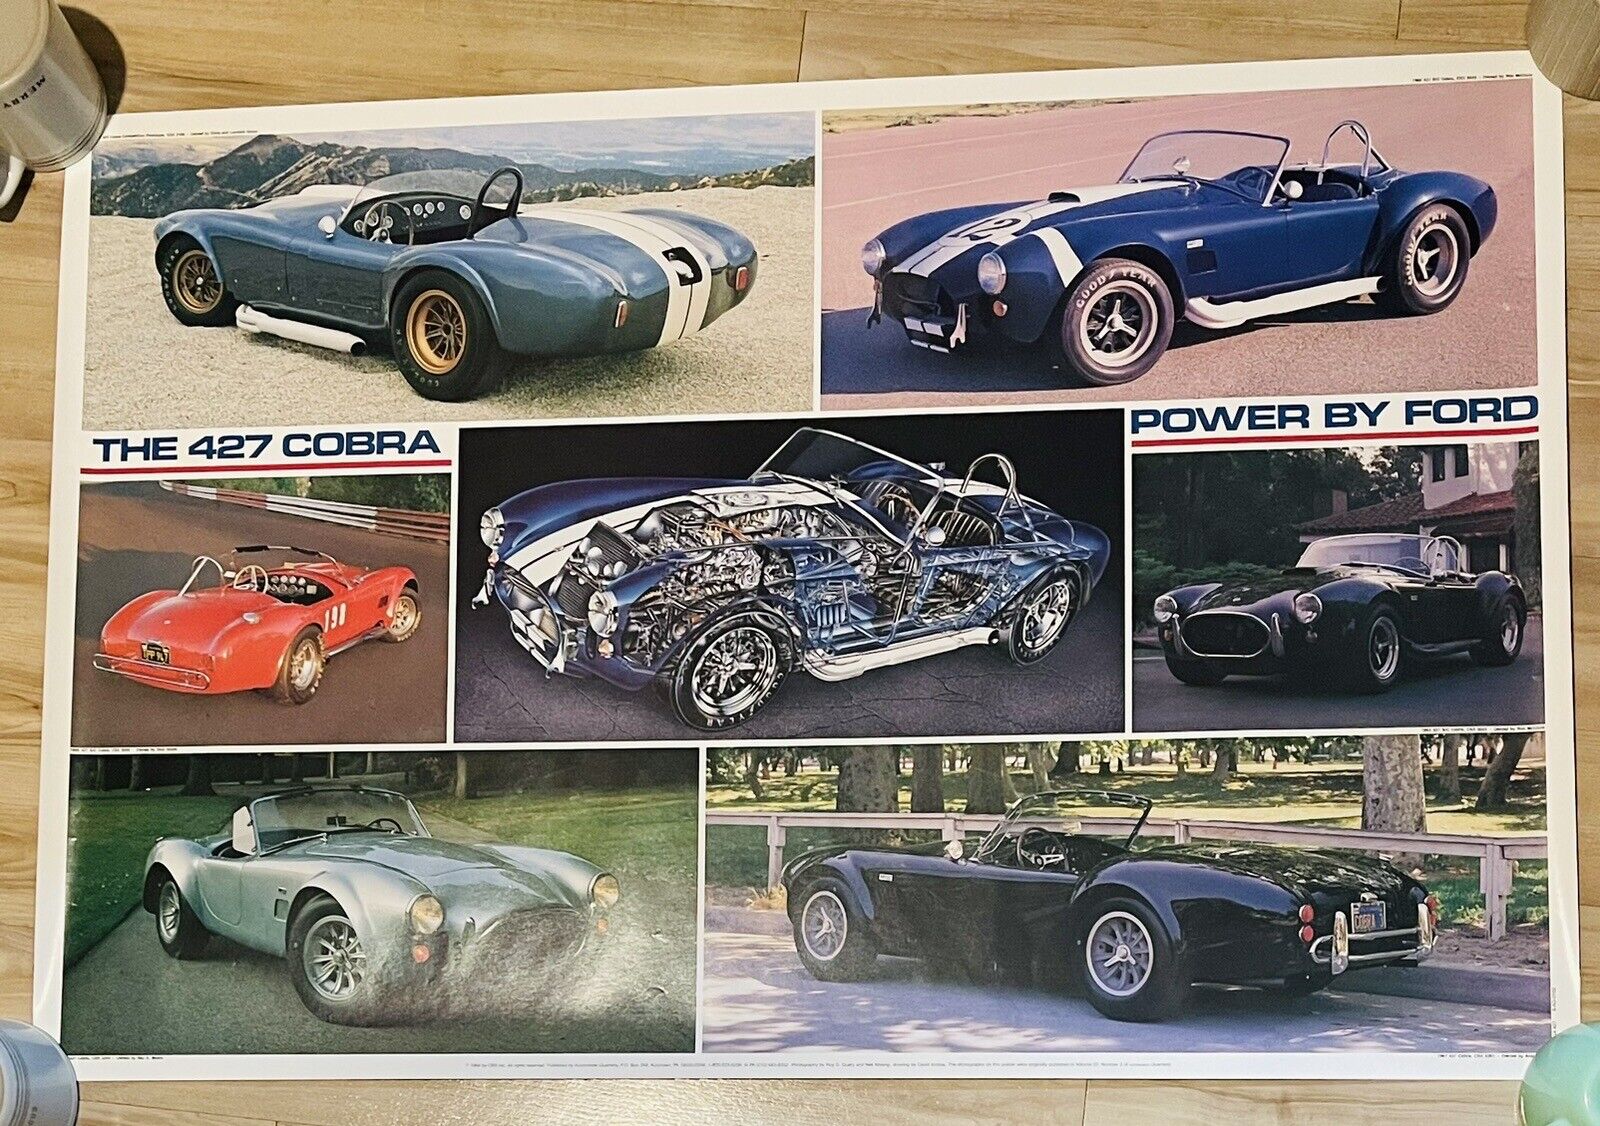 Rare Vintage Poster of 1964 1965 1966 The 427 Cobra CXS Power by Ford 1984 36x24